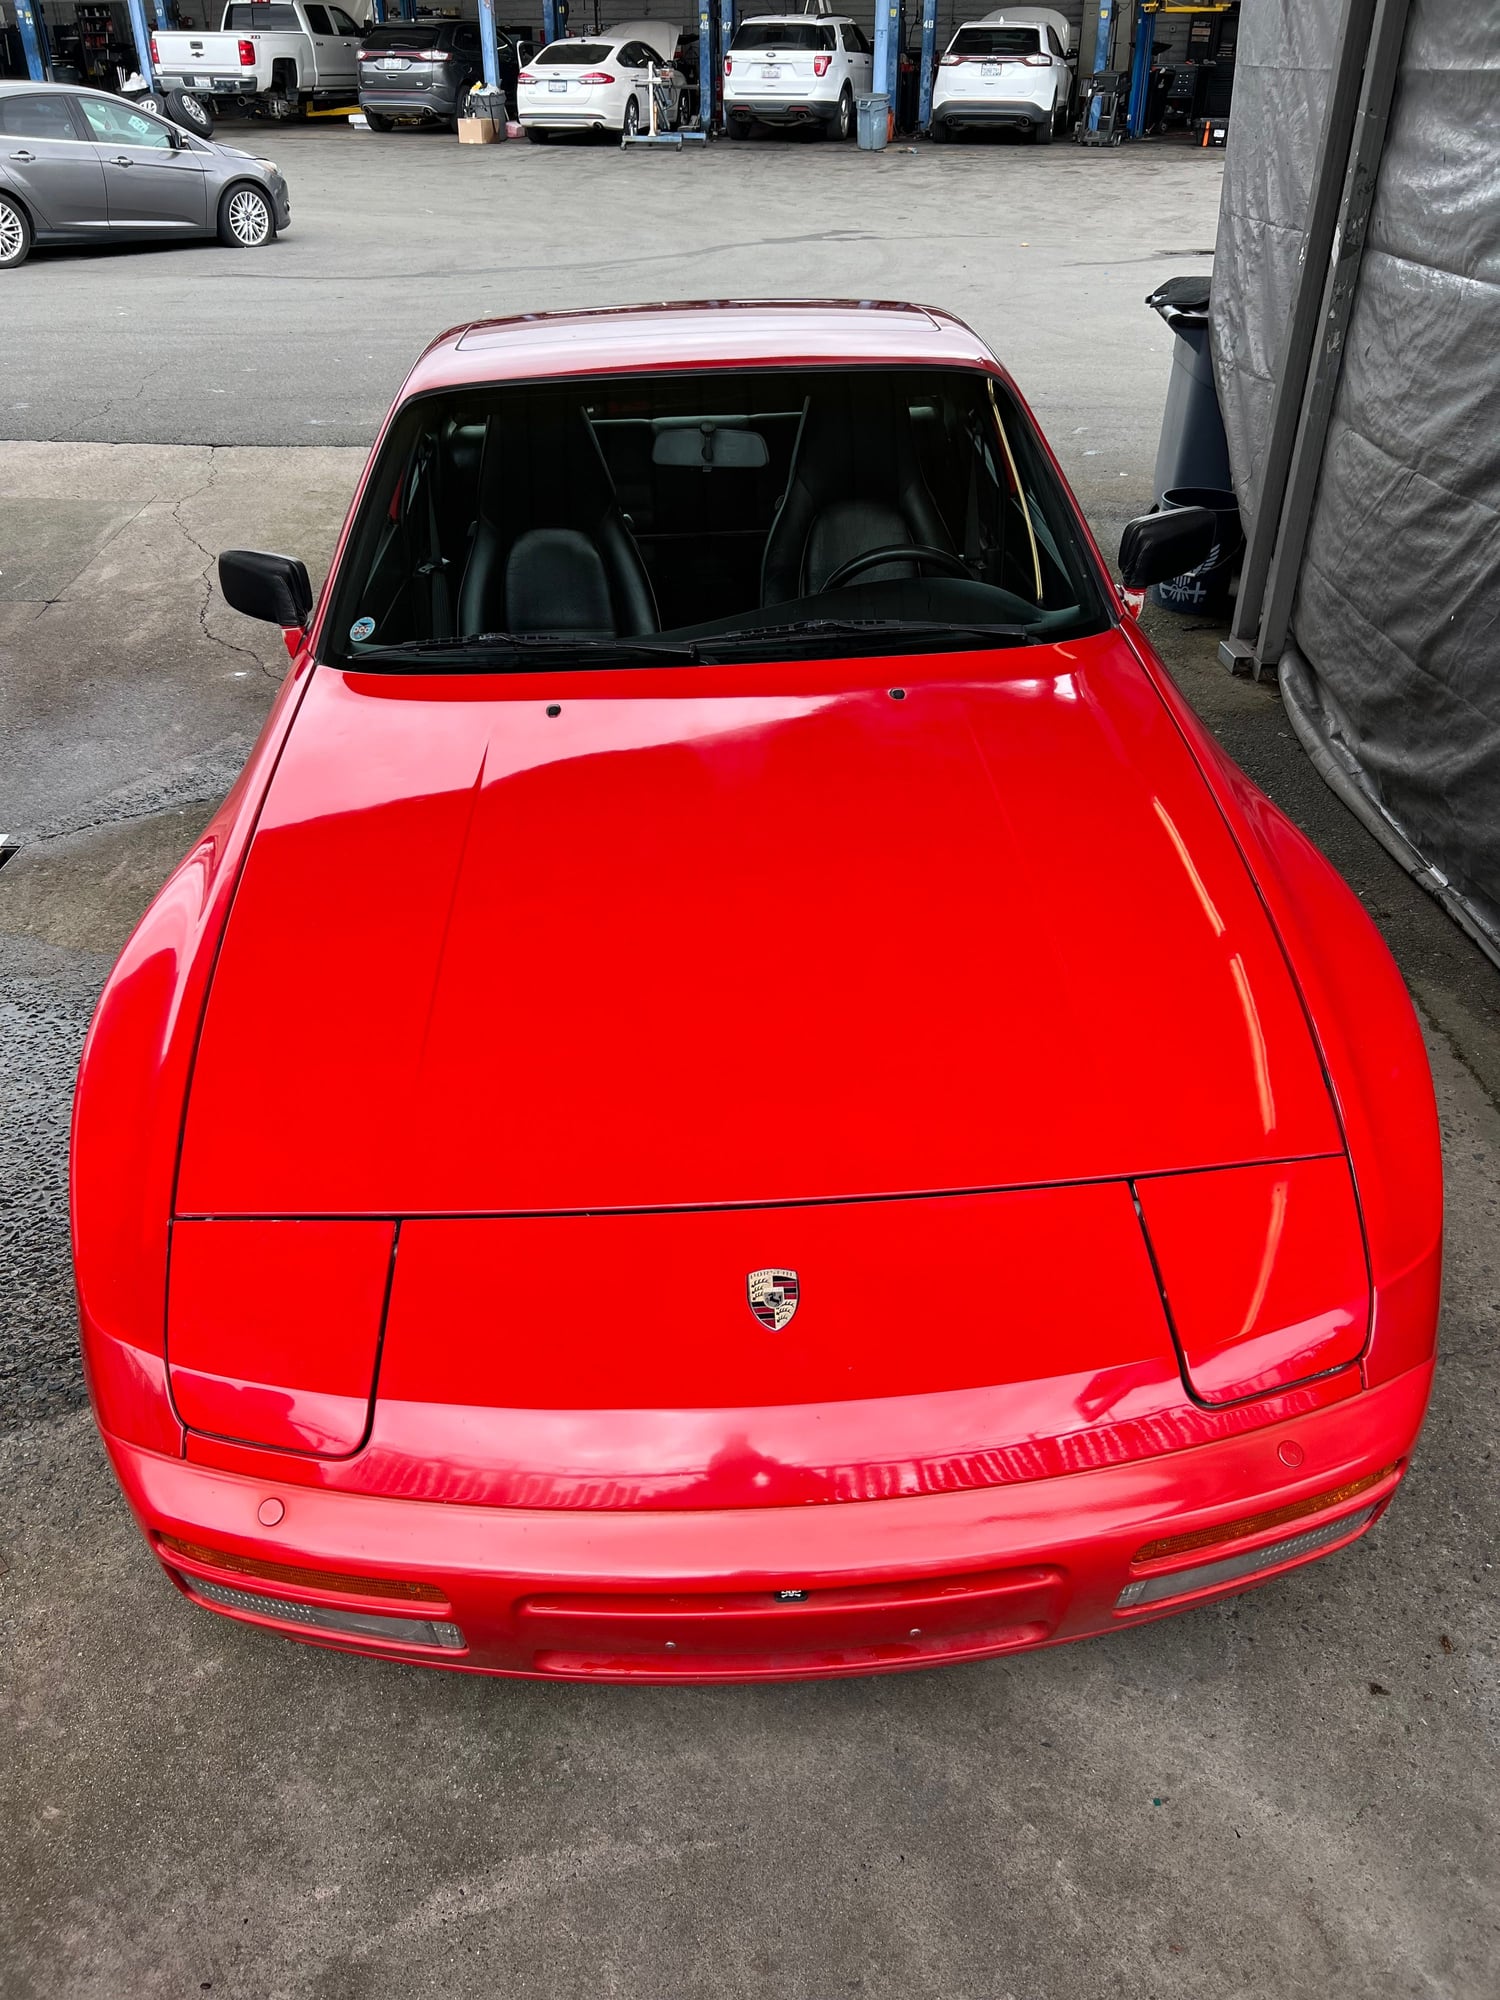 1987 Porsche 944 - 1987 Porsche 944 Turbo 2.8L ANDIAL 951 For Sale - Used - VIN WP0AA2950HN150264 - 4 cyl - 2WD - Manual - Coupe - Red - Vista, CA 92083, United States